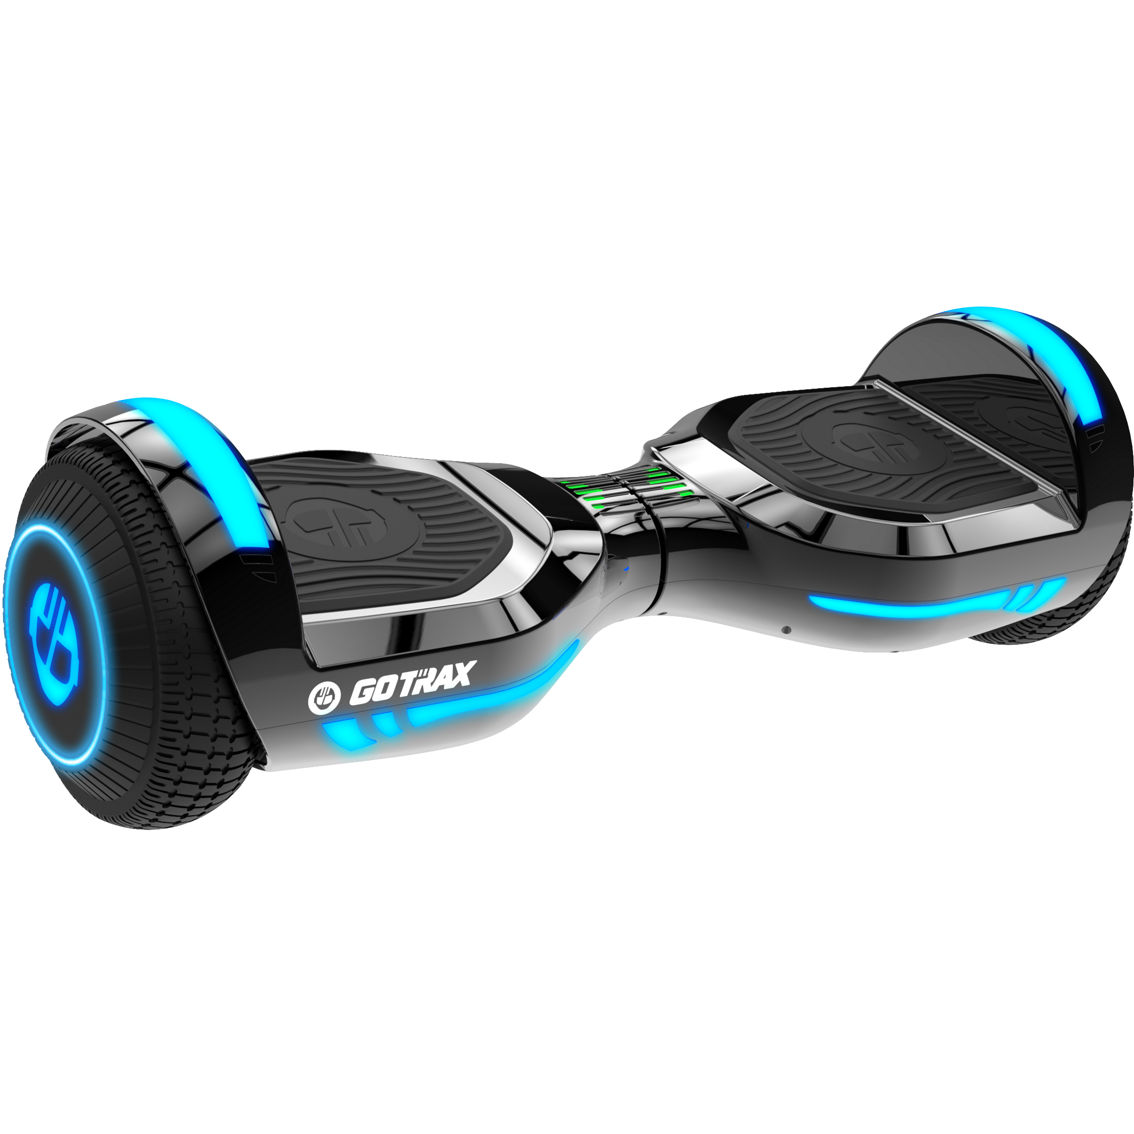 Go Trax Glide Silver Hoverboard, Hoverboards, Sports & Outdoors